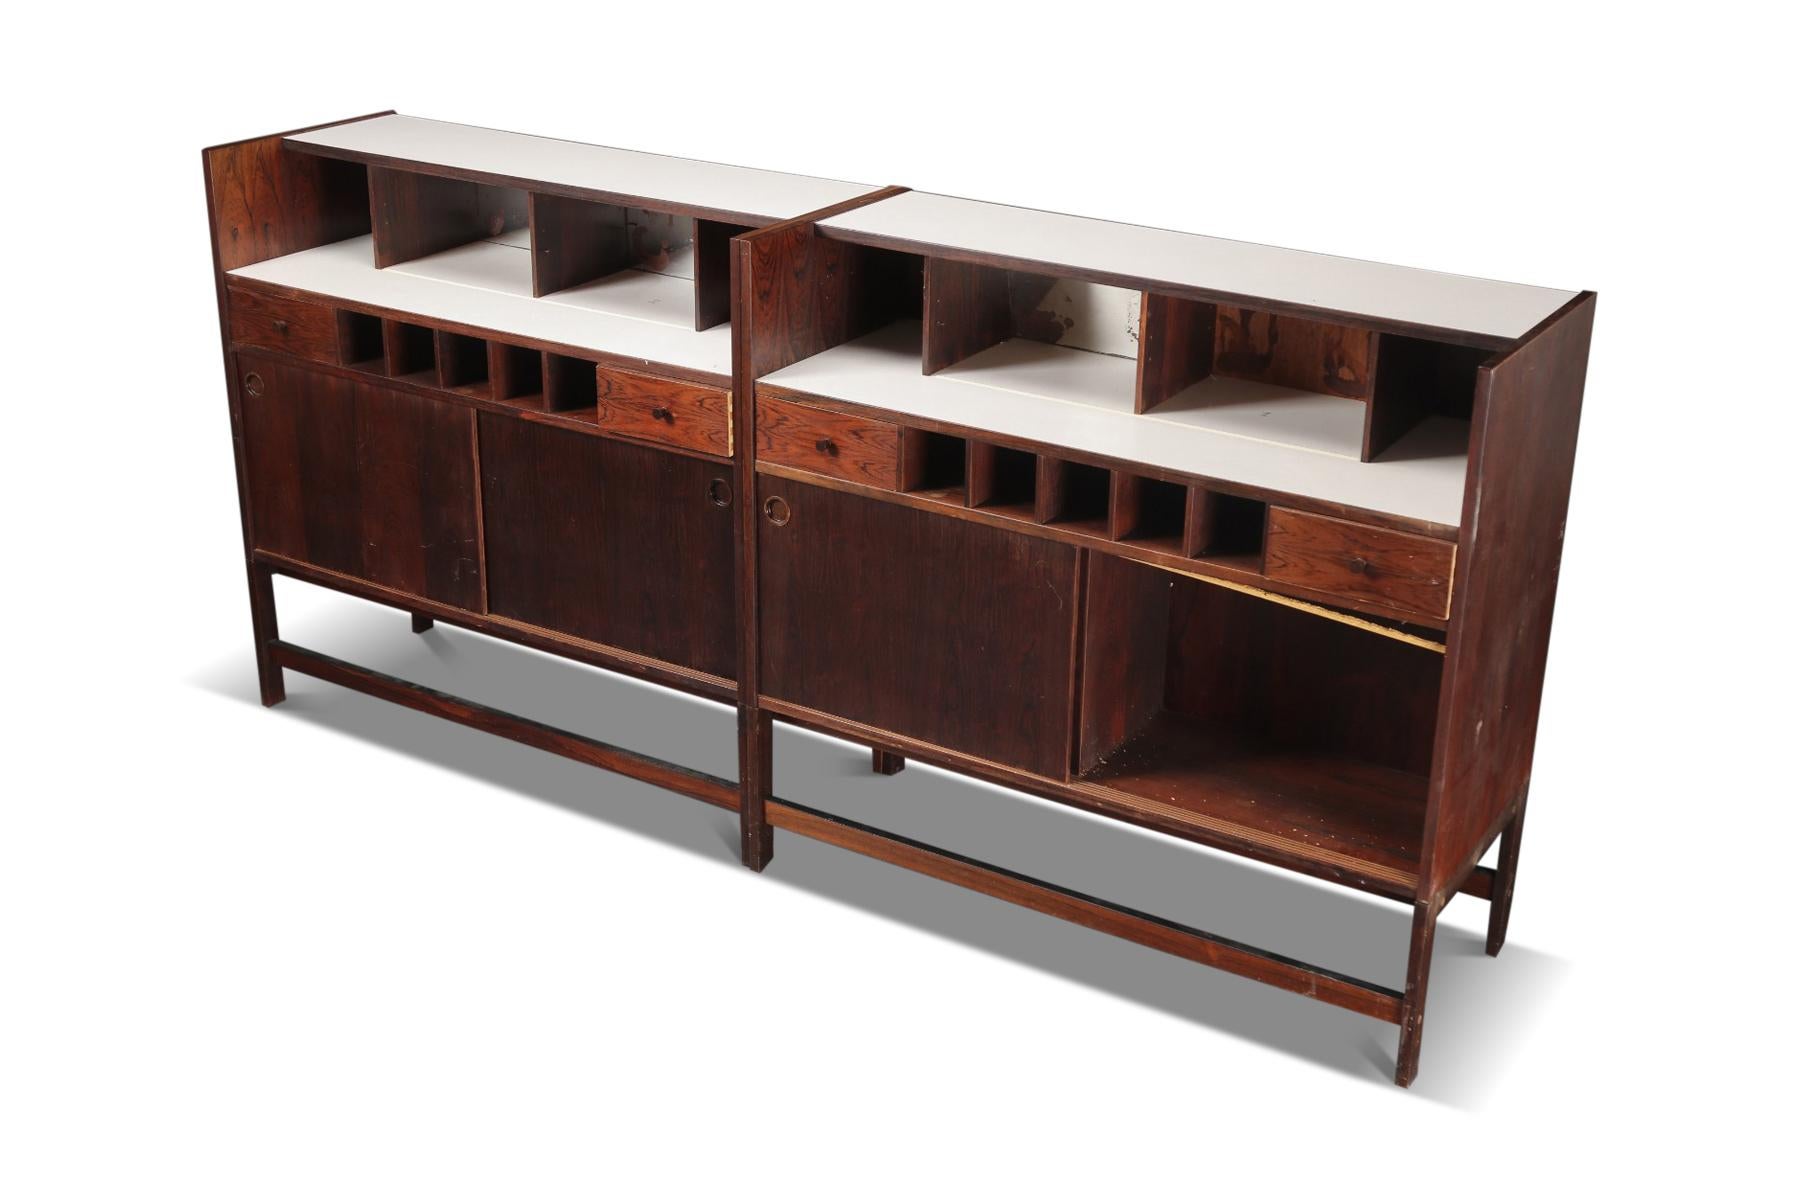 Pair Of Danish Modern Freestanding Cocktail Bars In Rosewood In Good Condition For Sale In Berkeley, CA